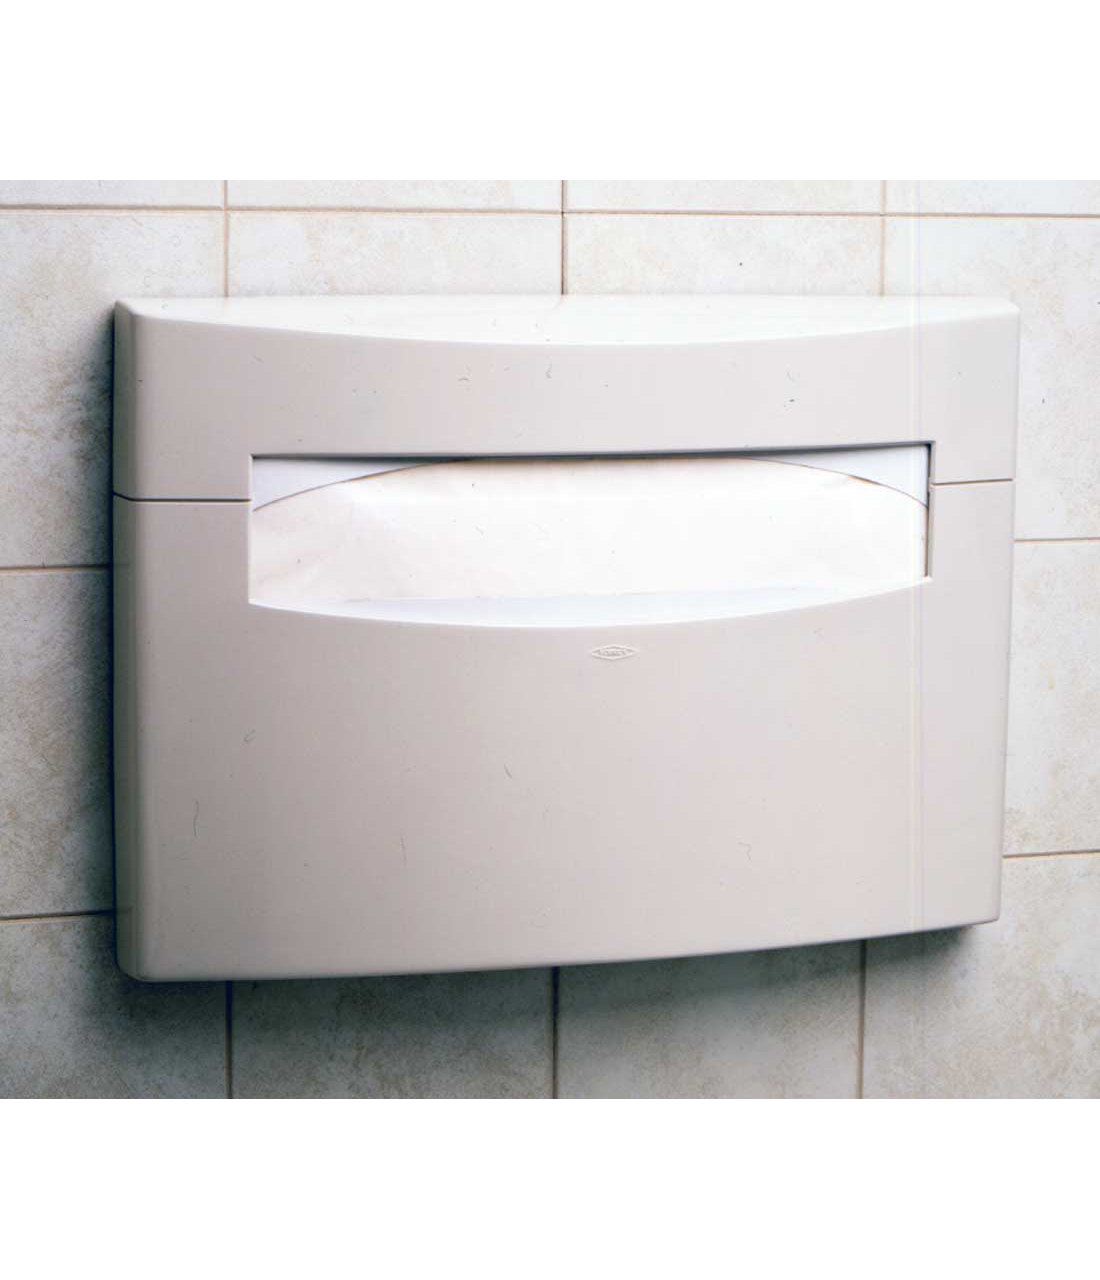 Surface-Mounted Seat-Cover Dispenser Image